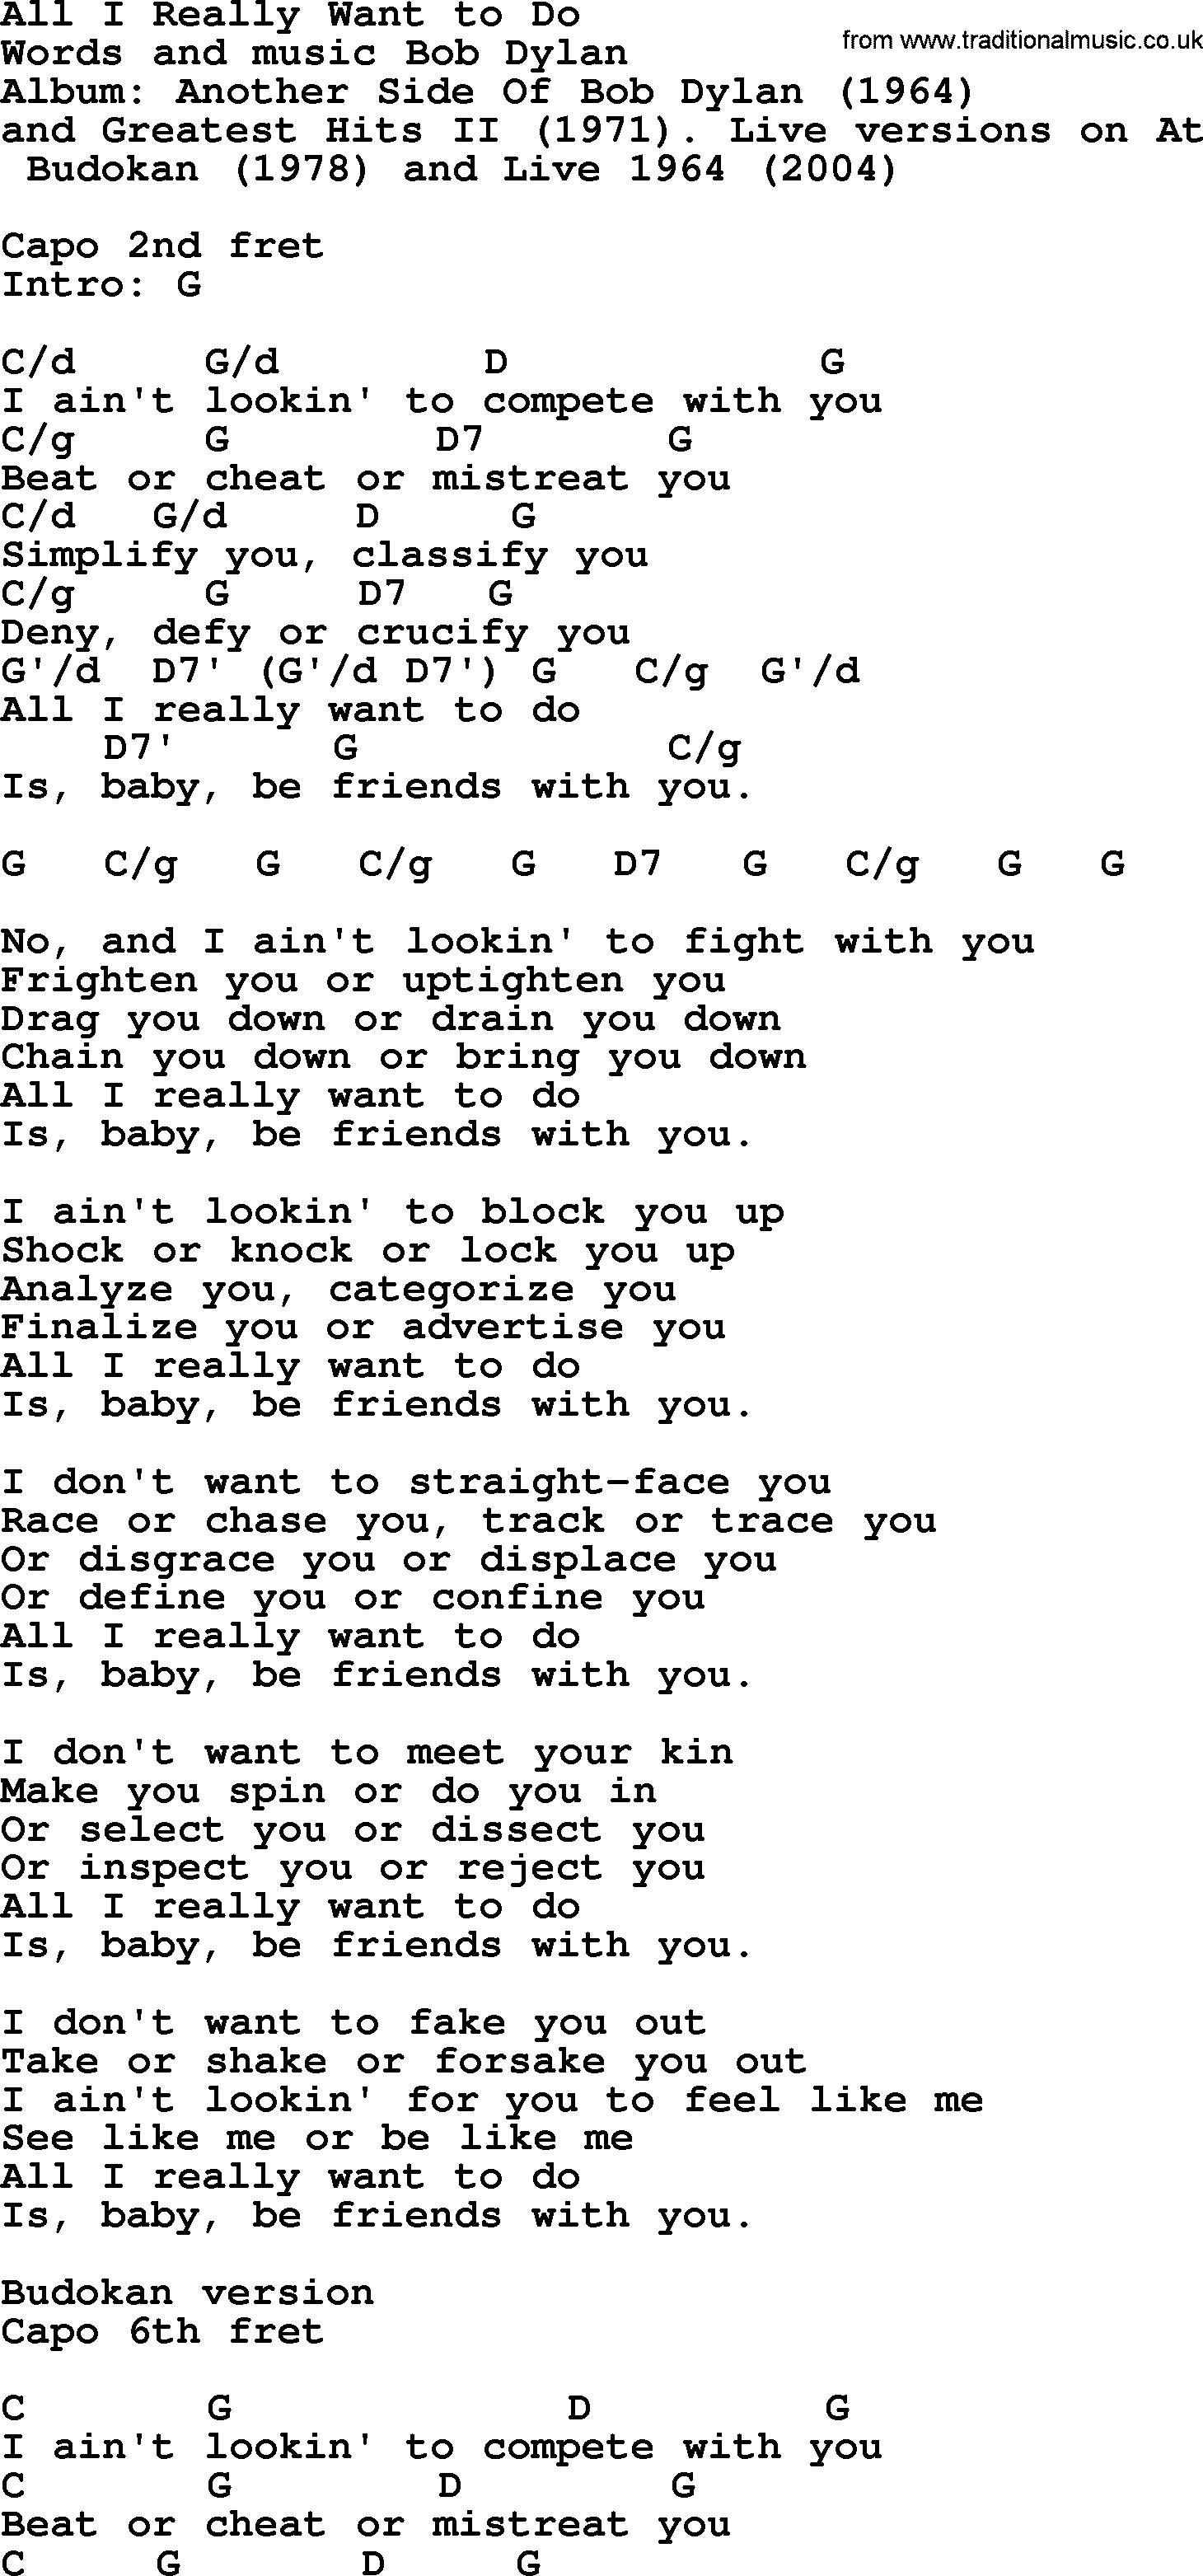 Bob Dylan song, lyrics with chords - All I Really Want to Do